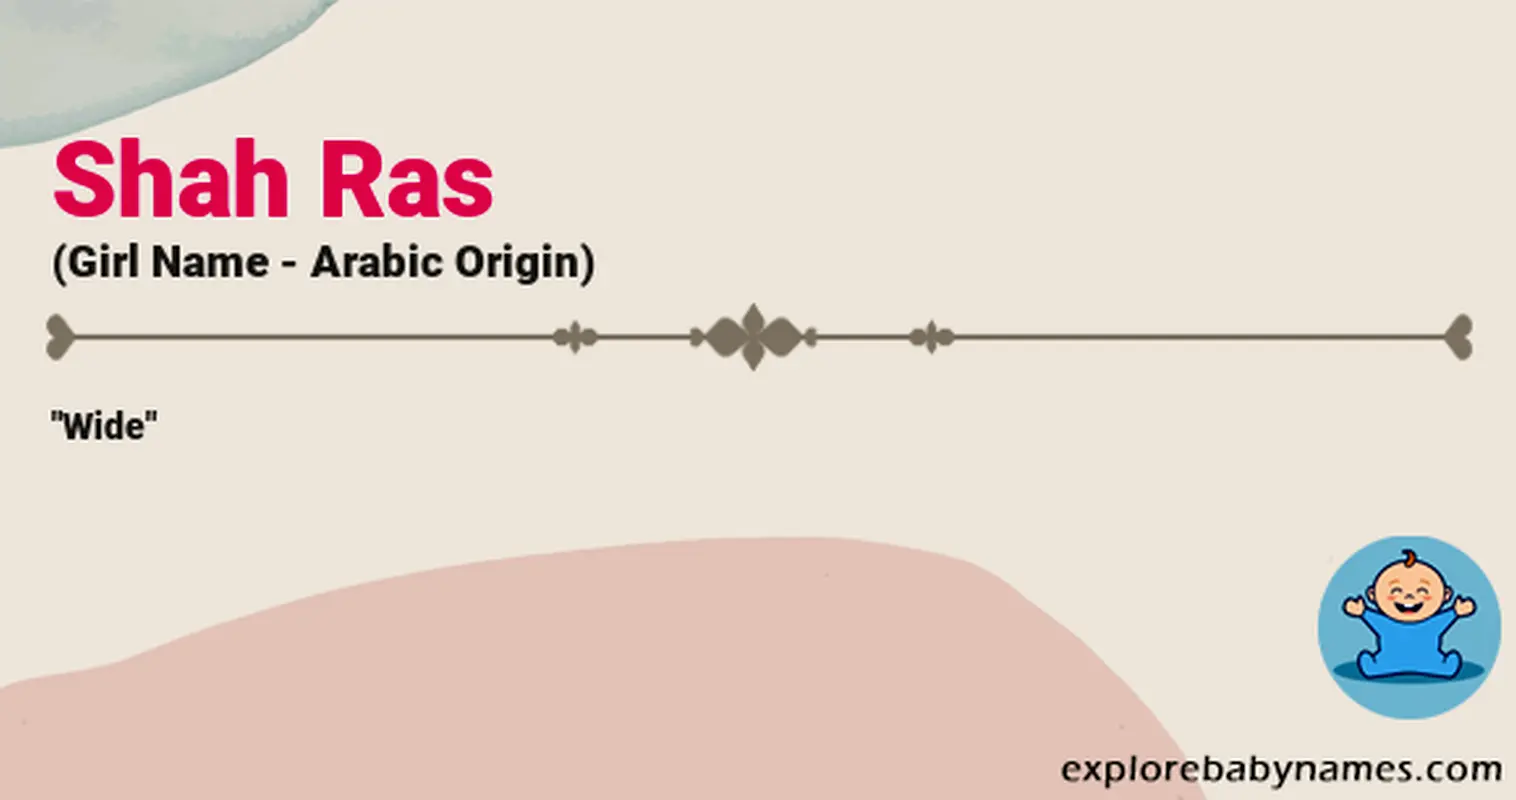 Meaning of Shah Ras